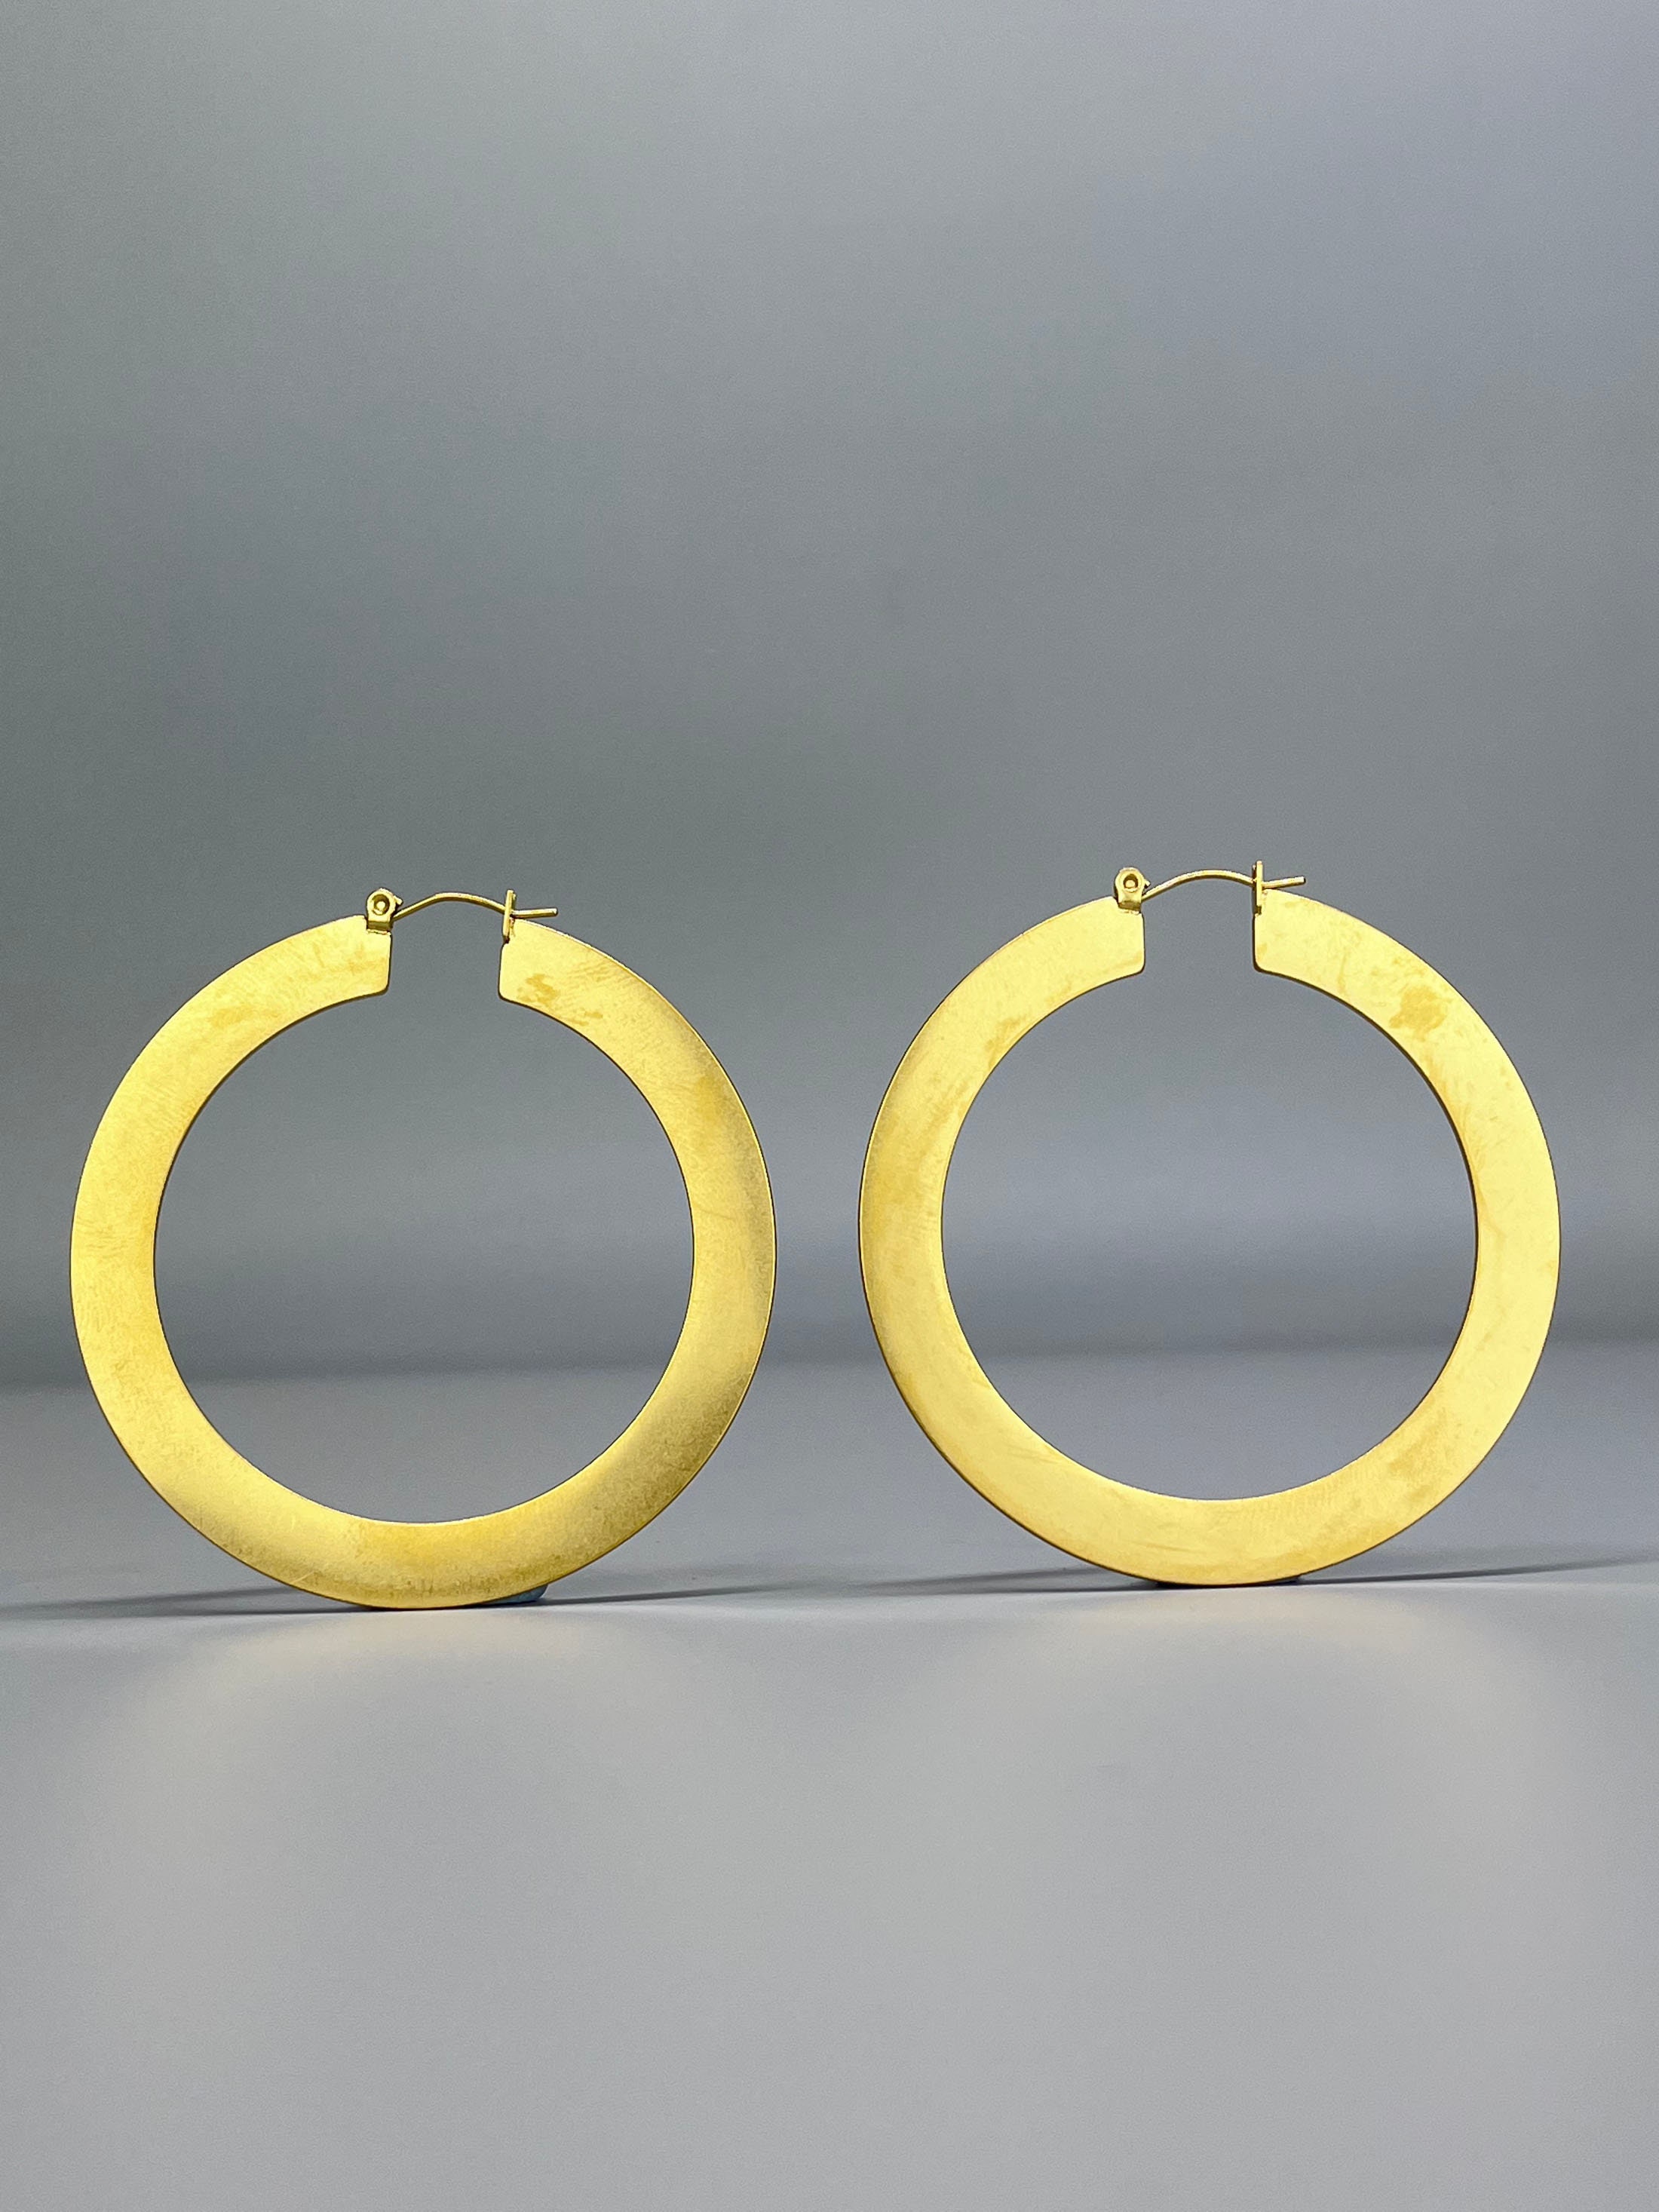 Luxury Gold Hoop Earrings Set Forth For Women And Girls Designer Jewelry  For Valentines Day From Designer_sunglass123, $12.55